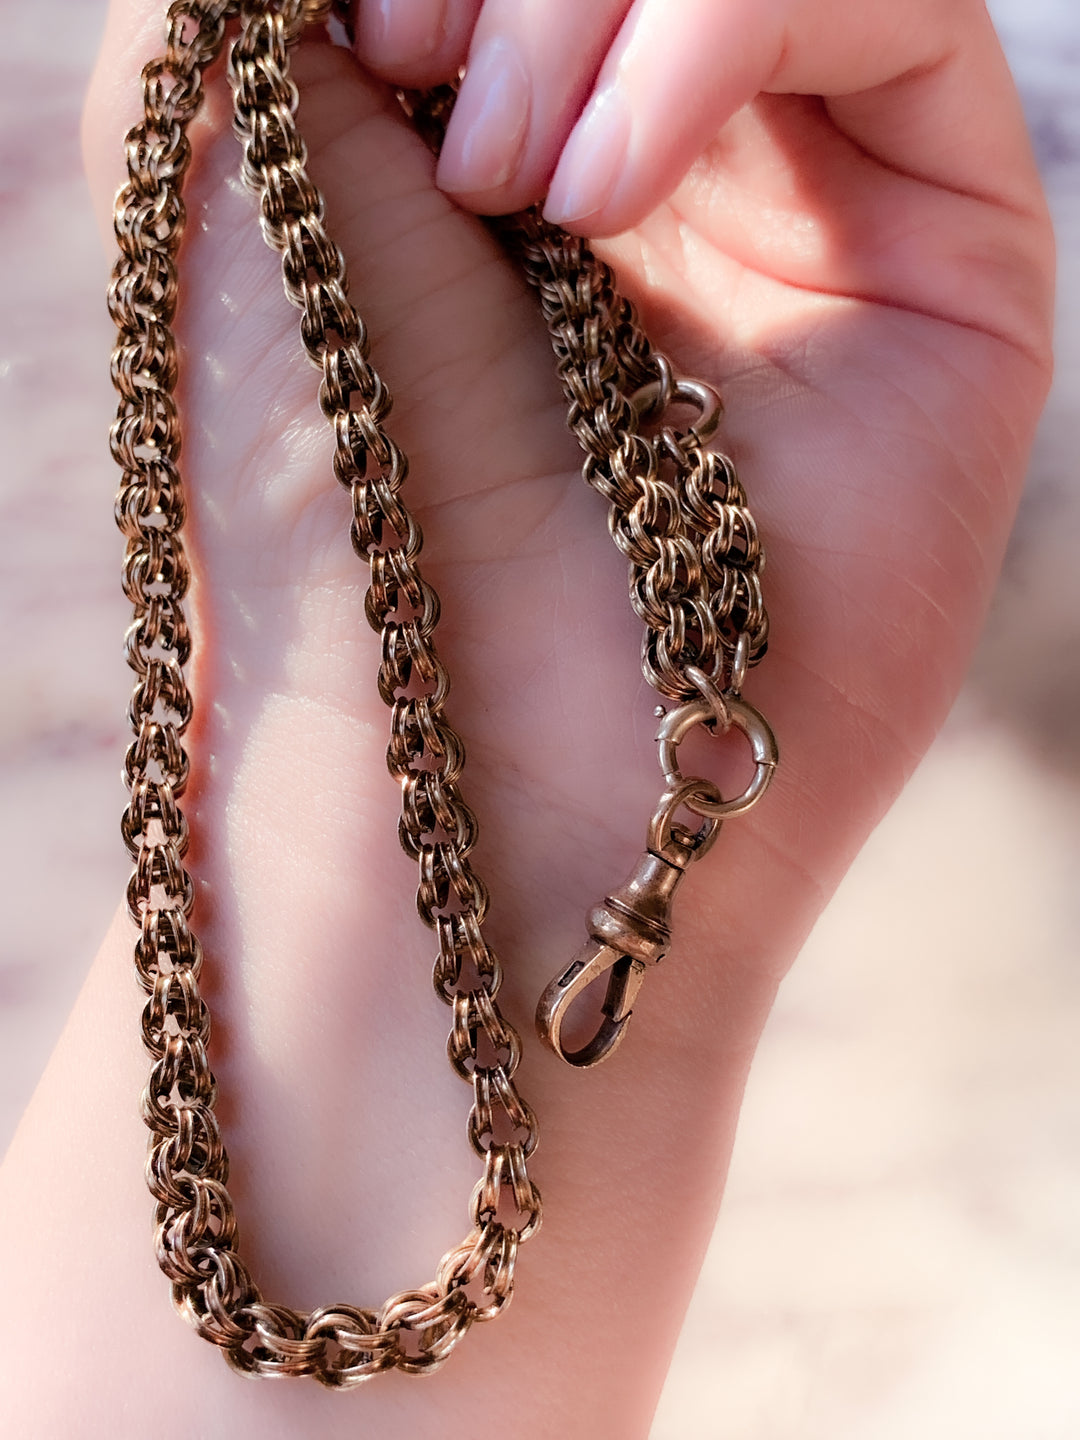 Gorgeous 10ct American Chain